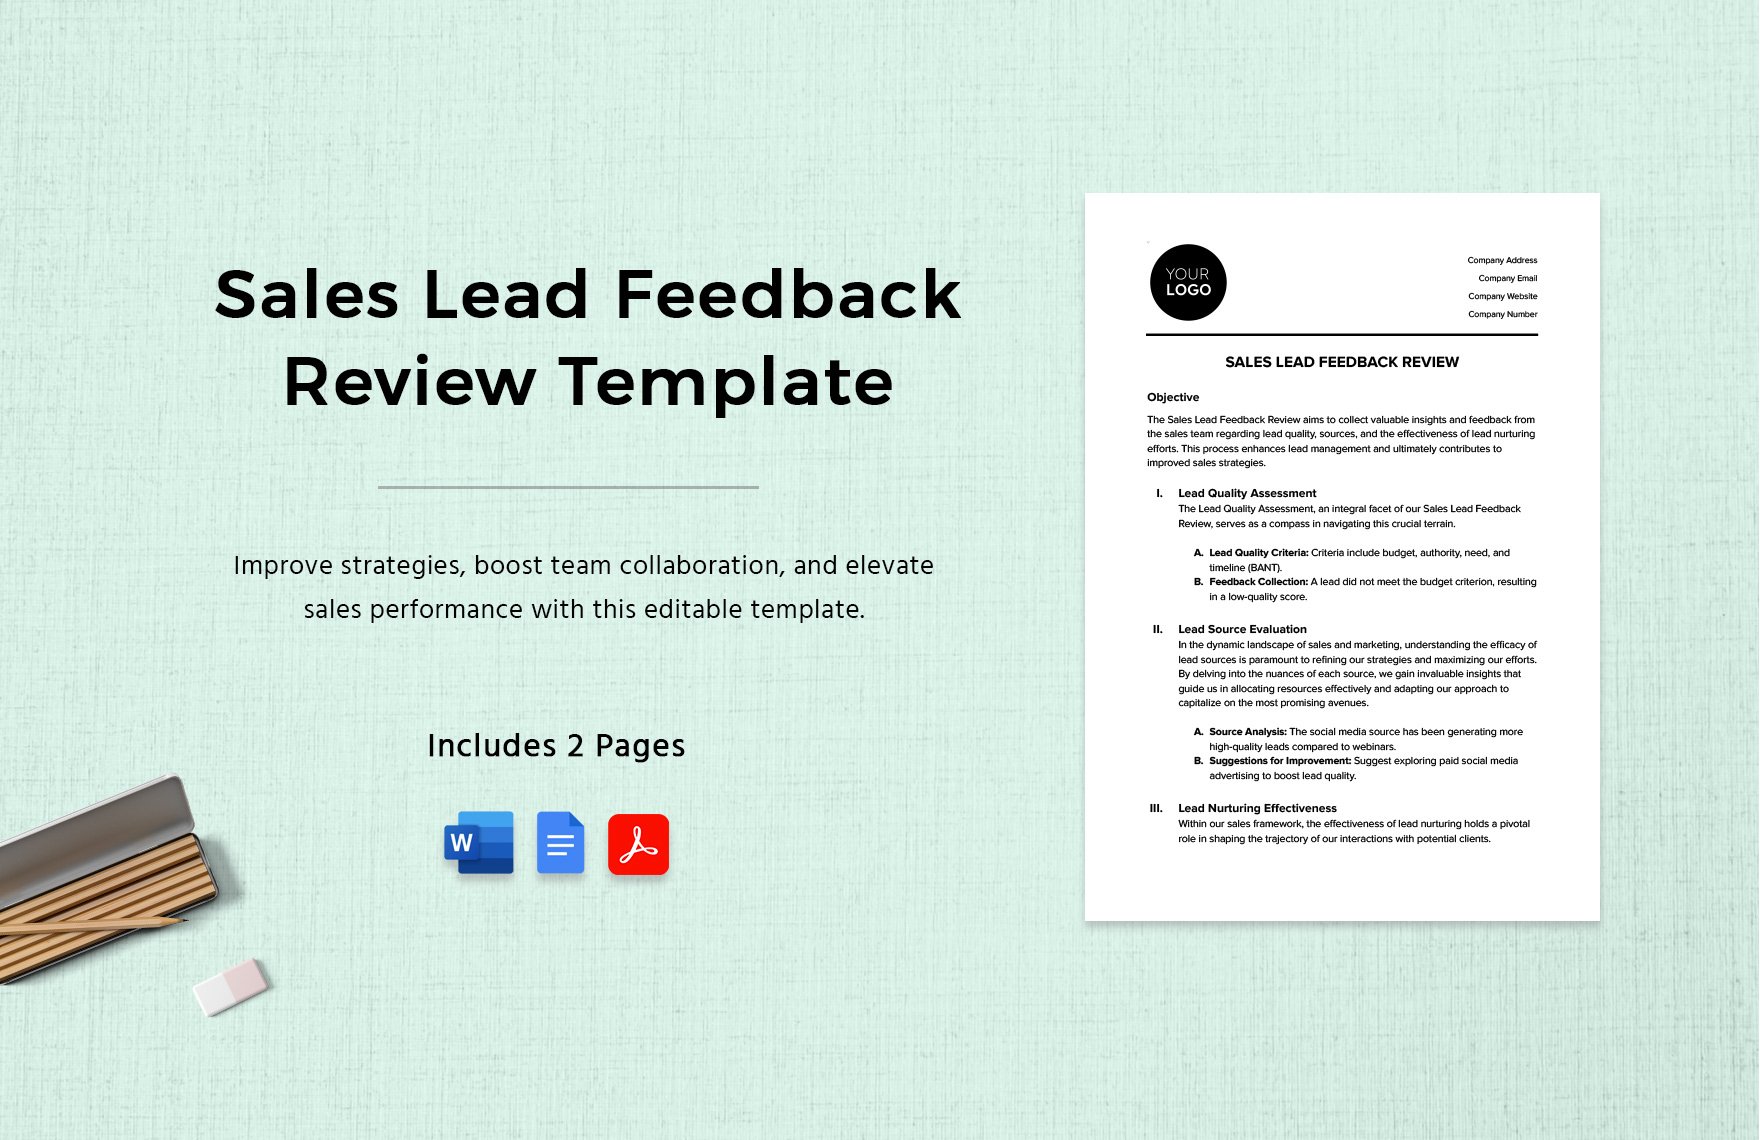  Sales Lead Feedback Review Template